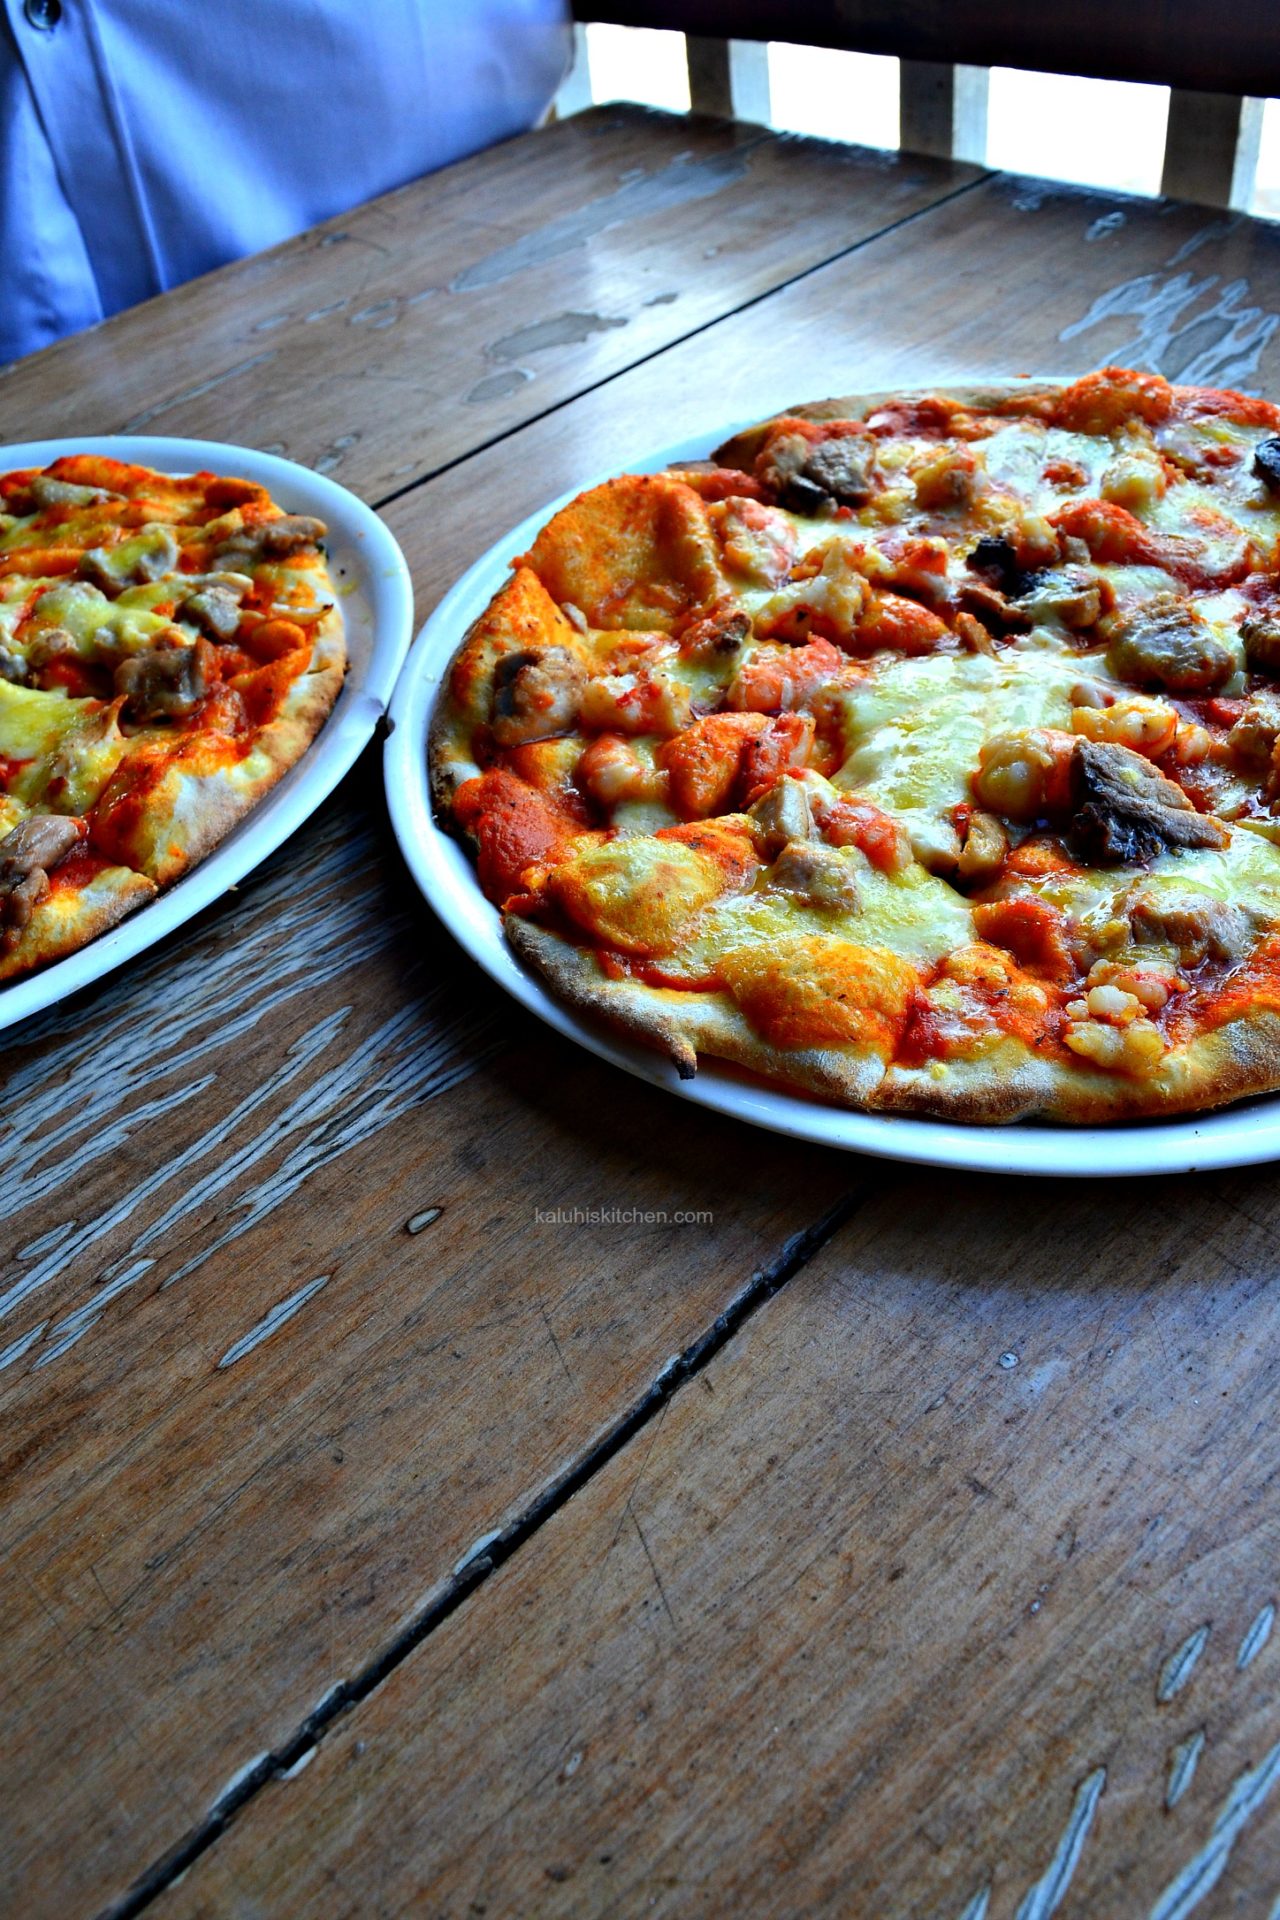 sea food pizza and chicken pizza served at the lamu papace hotel for onja bloggers at the lamu food festival 2016